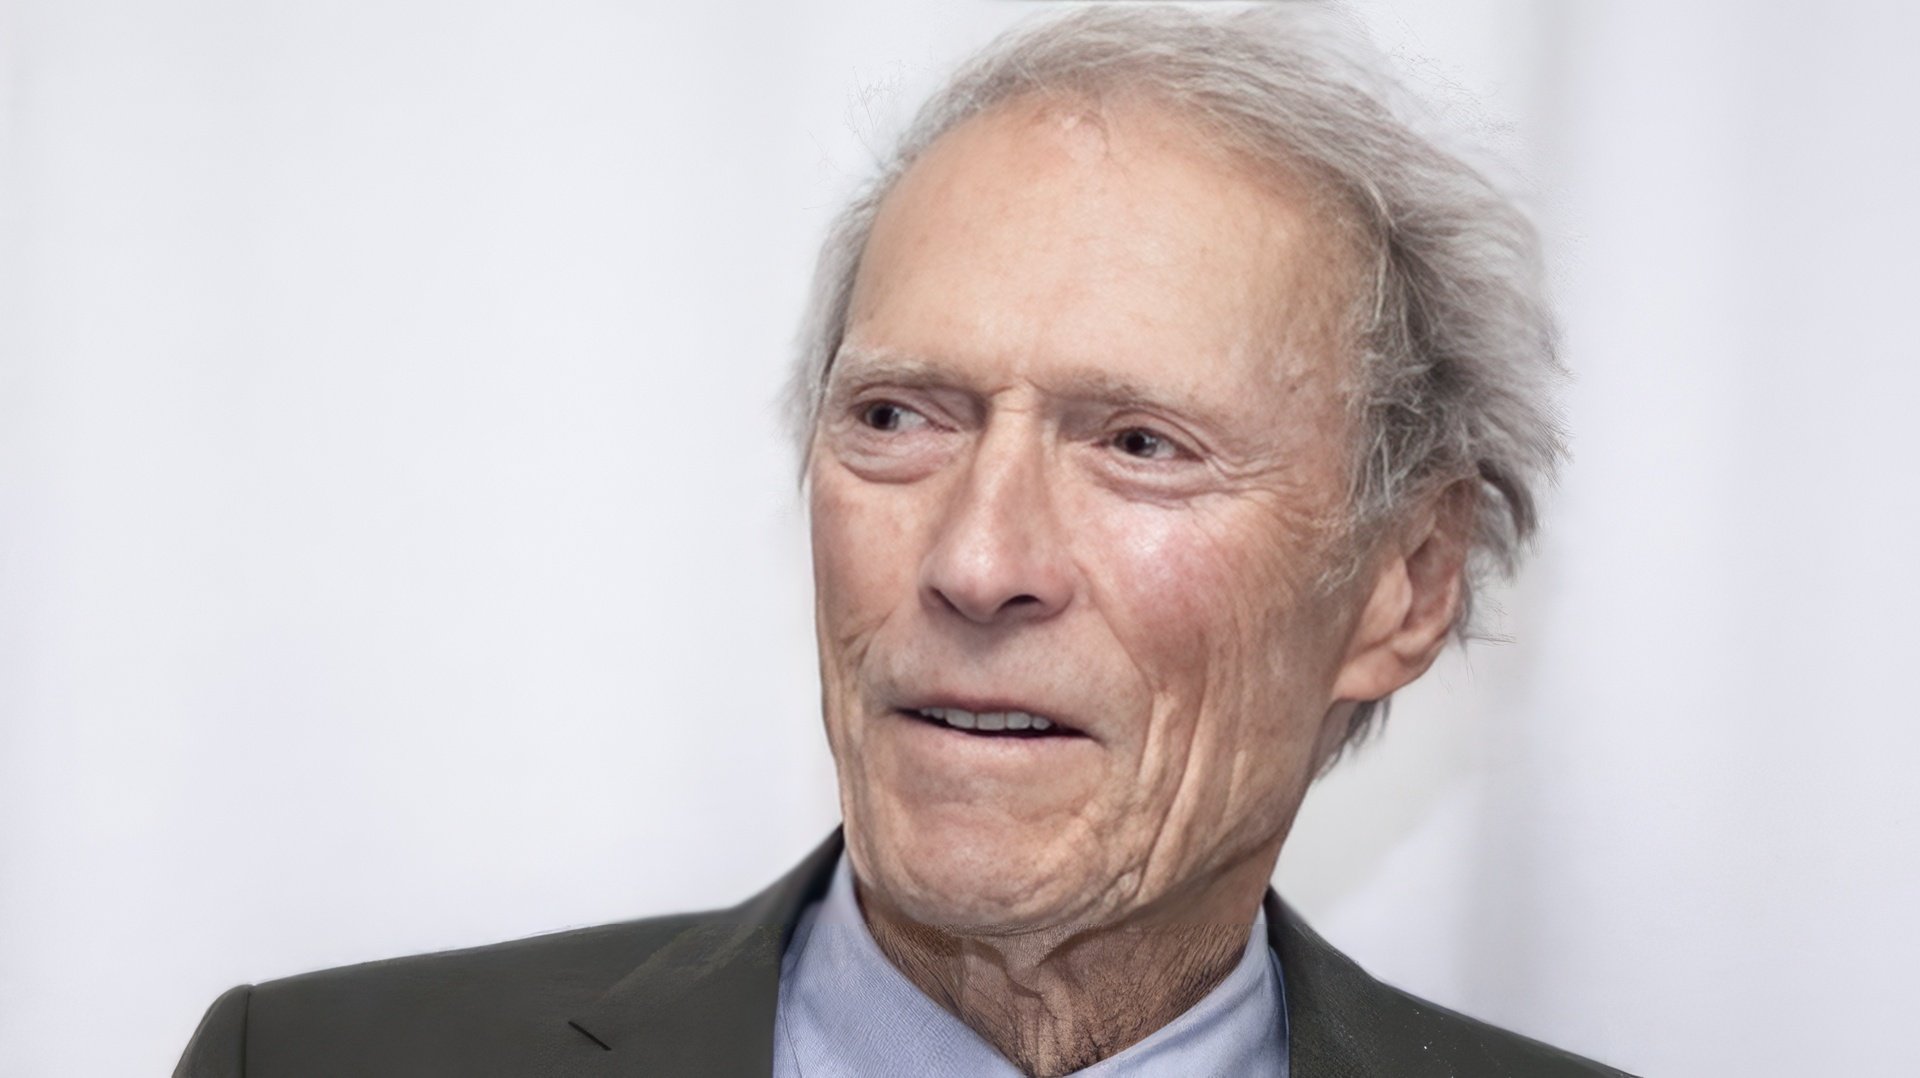 Clint Eastwood in 2020